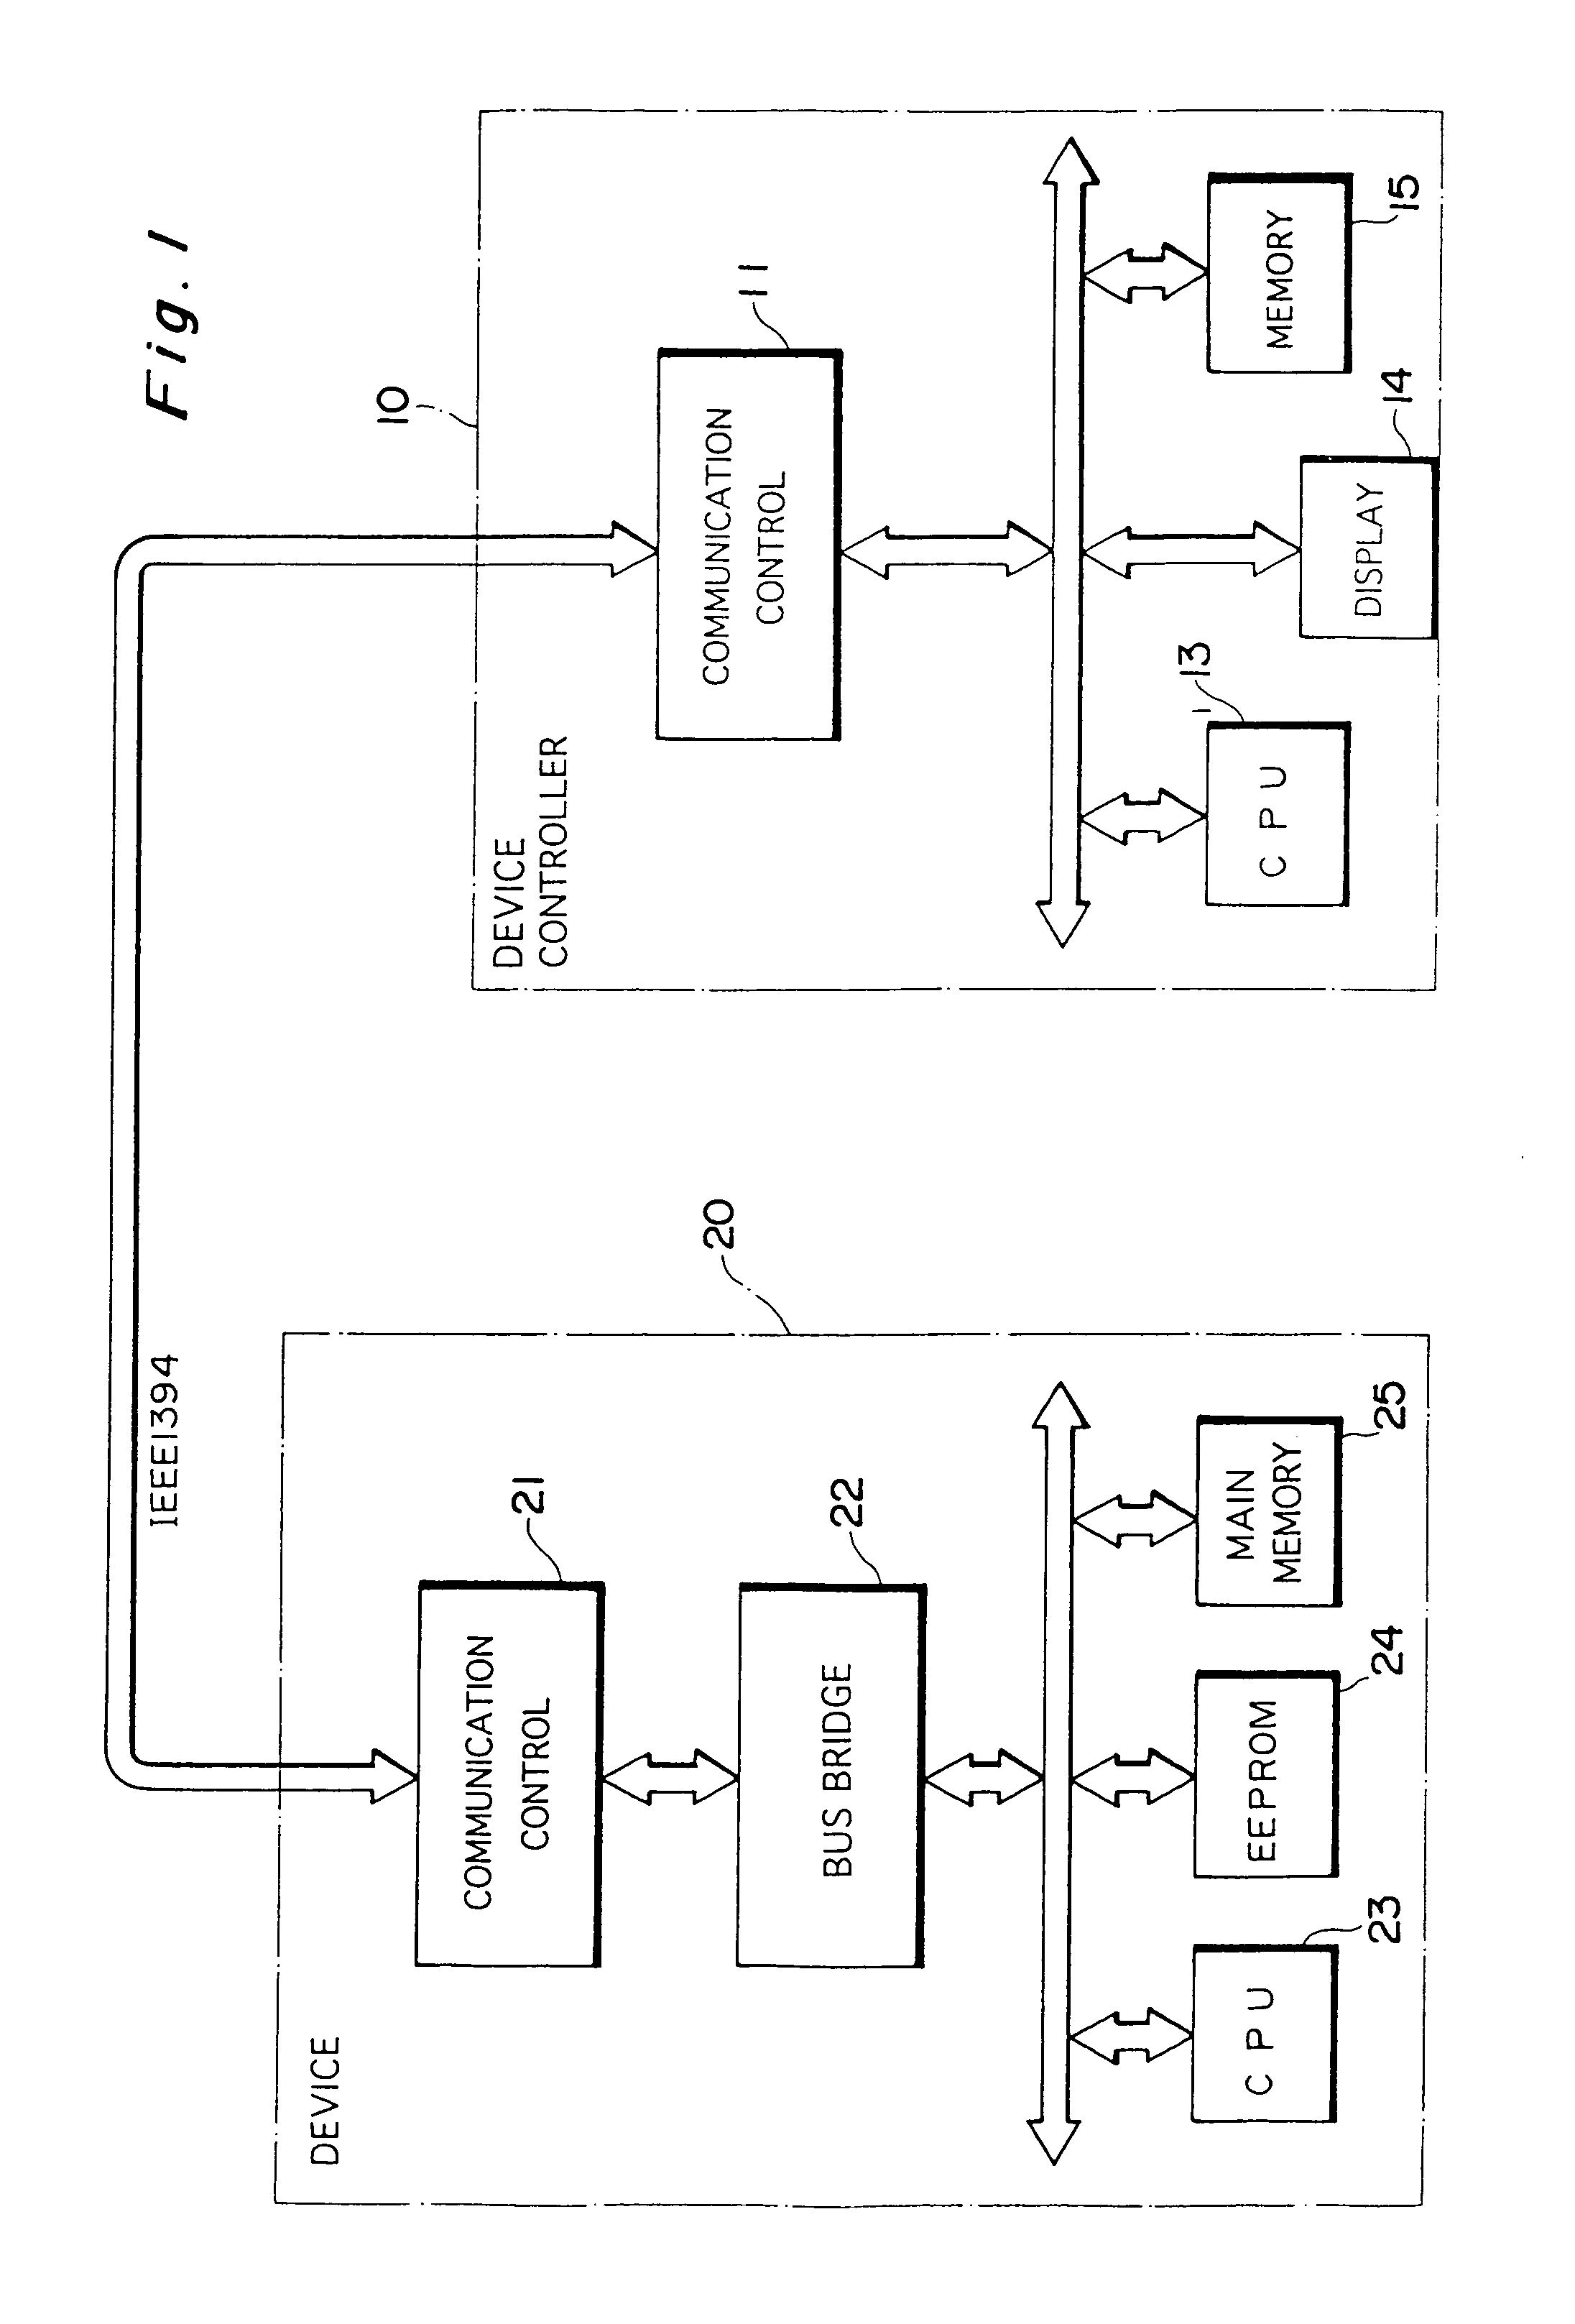 Charging and monitoring apparatus and method of charging a battery and monitoring the power level through power supply line